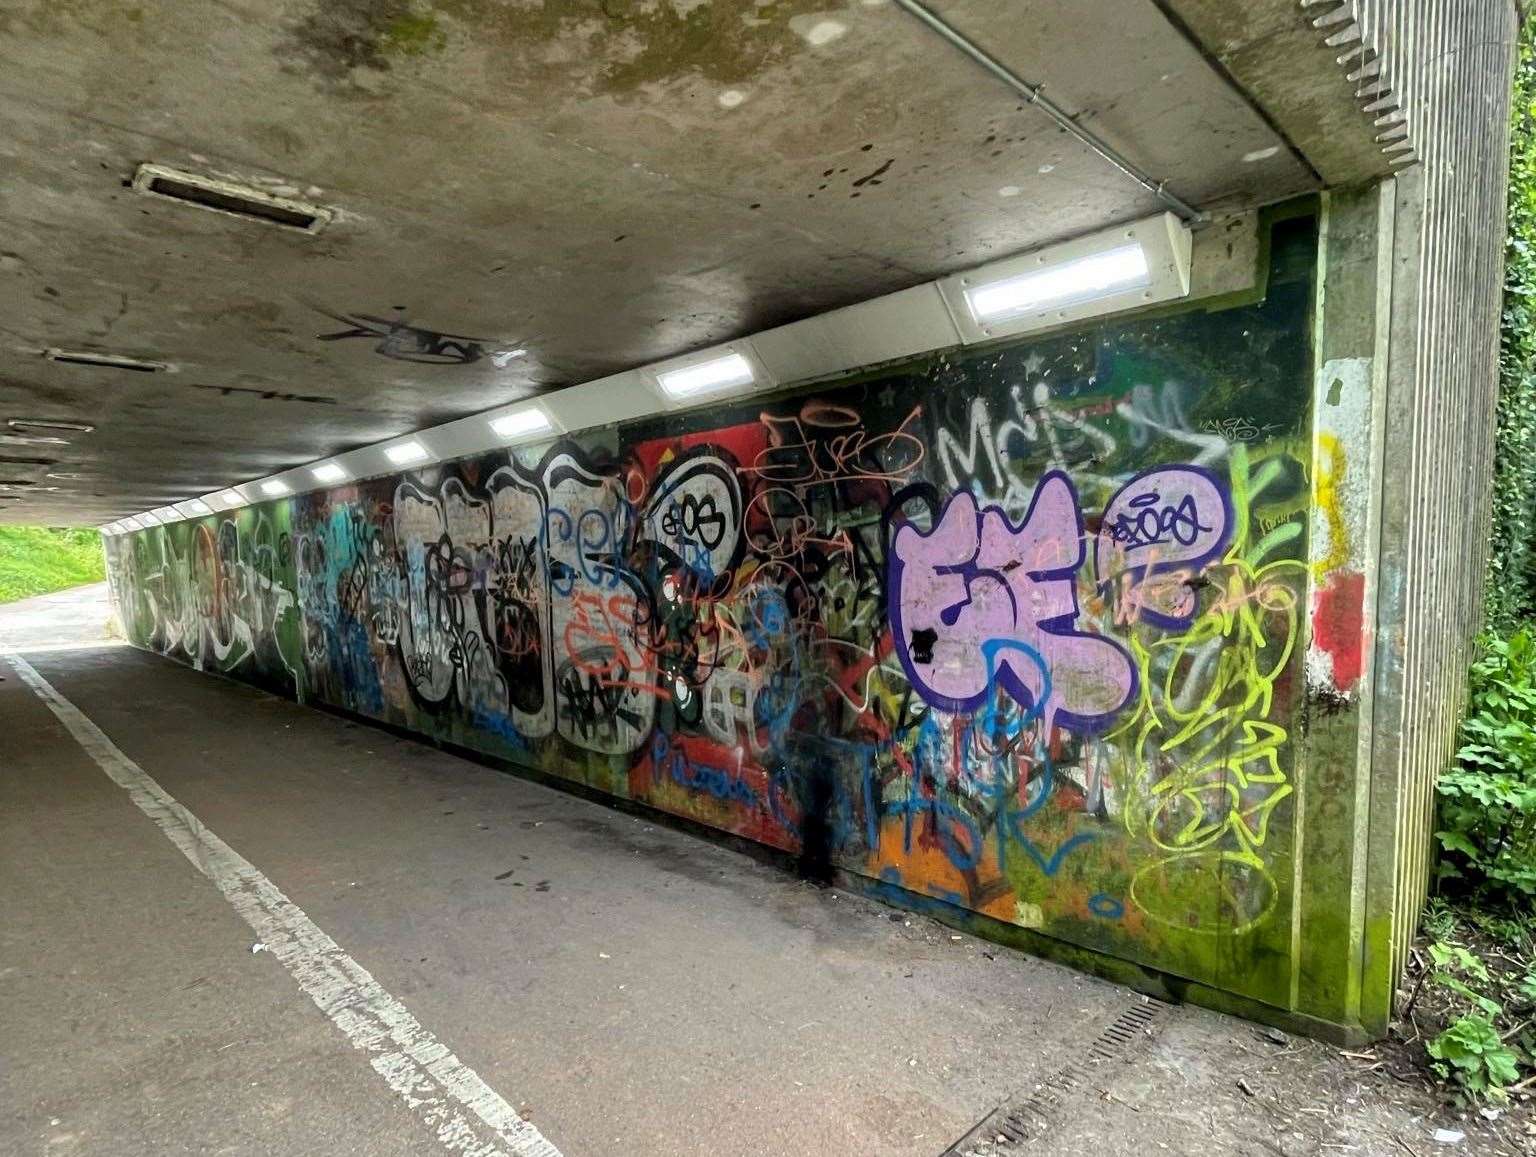 The underpass would often flood but now KCC have fixed the drainage problems. The graffiti is now set to be replaced with designs inspired by nature Picture: Dover Smart Project